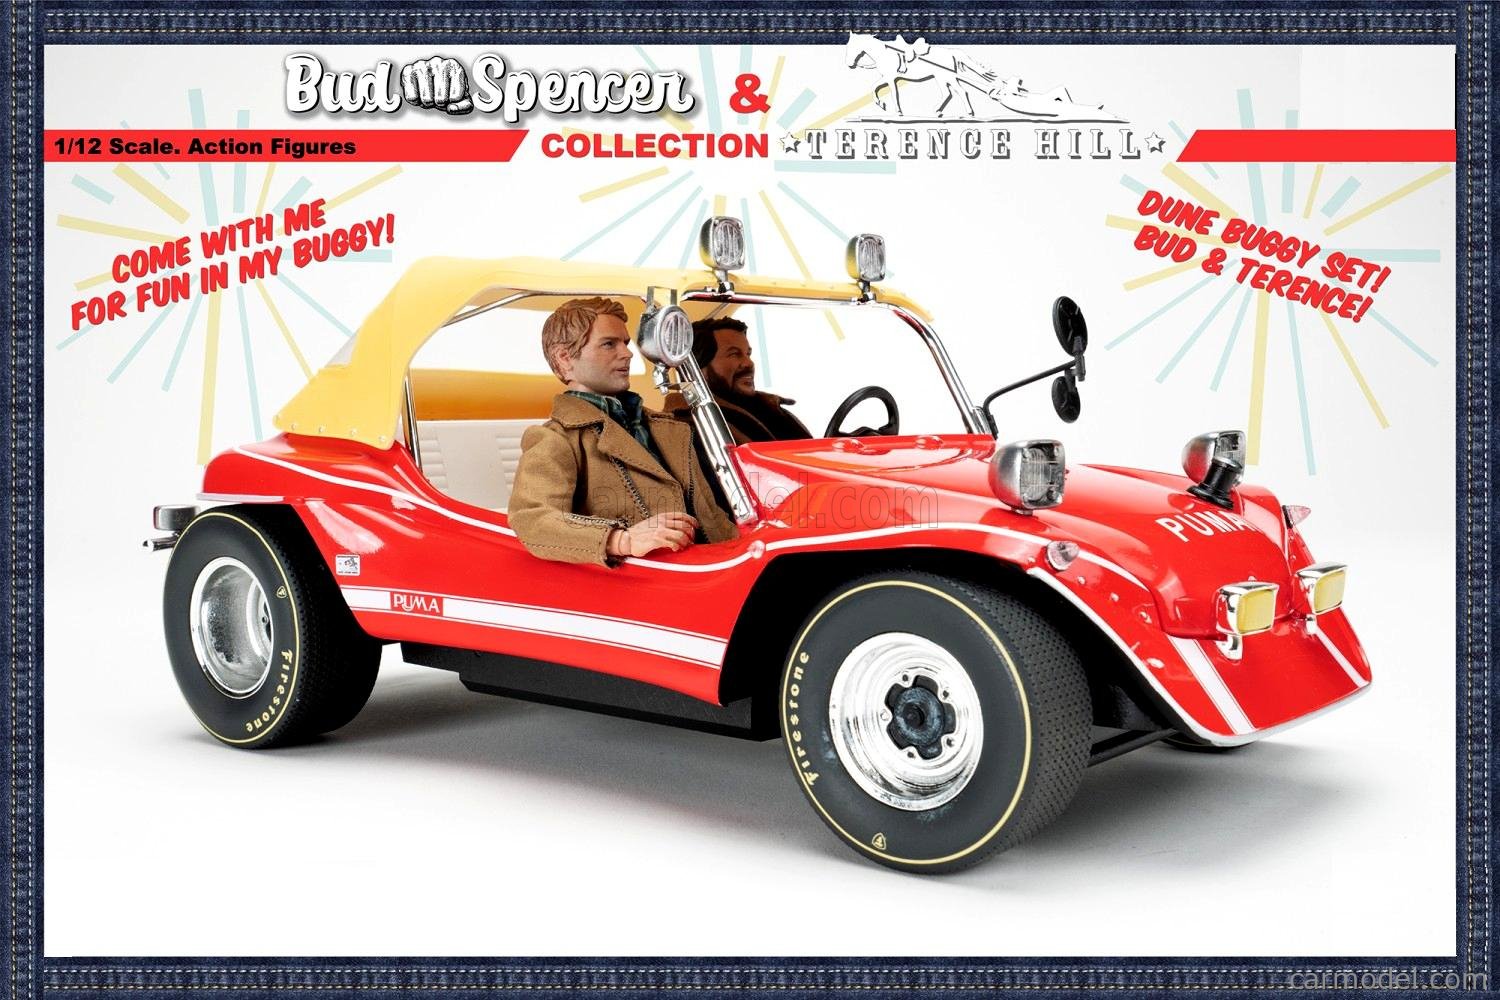 CLC-MODELS 90025+90020+90018 Masstab: 1/12  PUMA DUNE BUGGY 1972 - WITH BUD SPENCER AND TERENCE HILL ACTION FIGURES - TV SERIES - ALTRIMENTI CI ARRABBIAMO RED